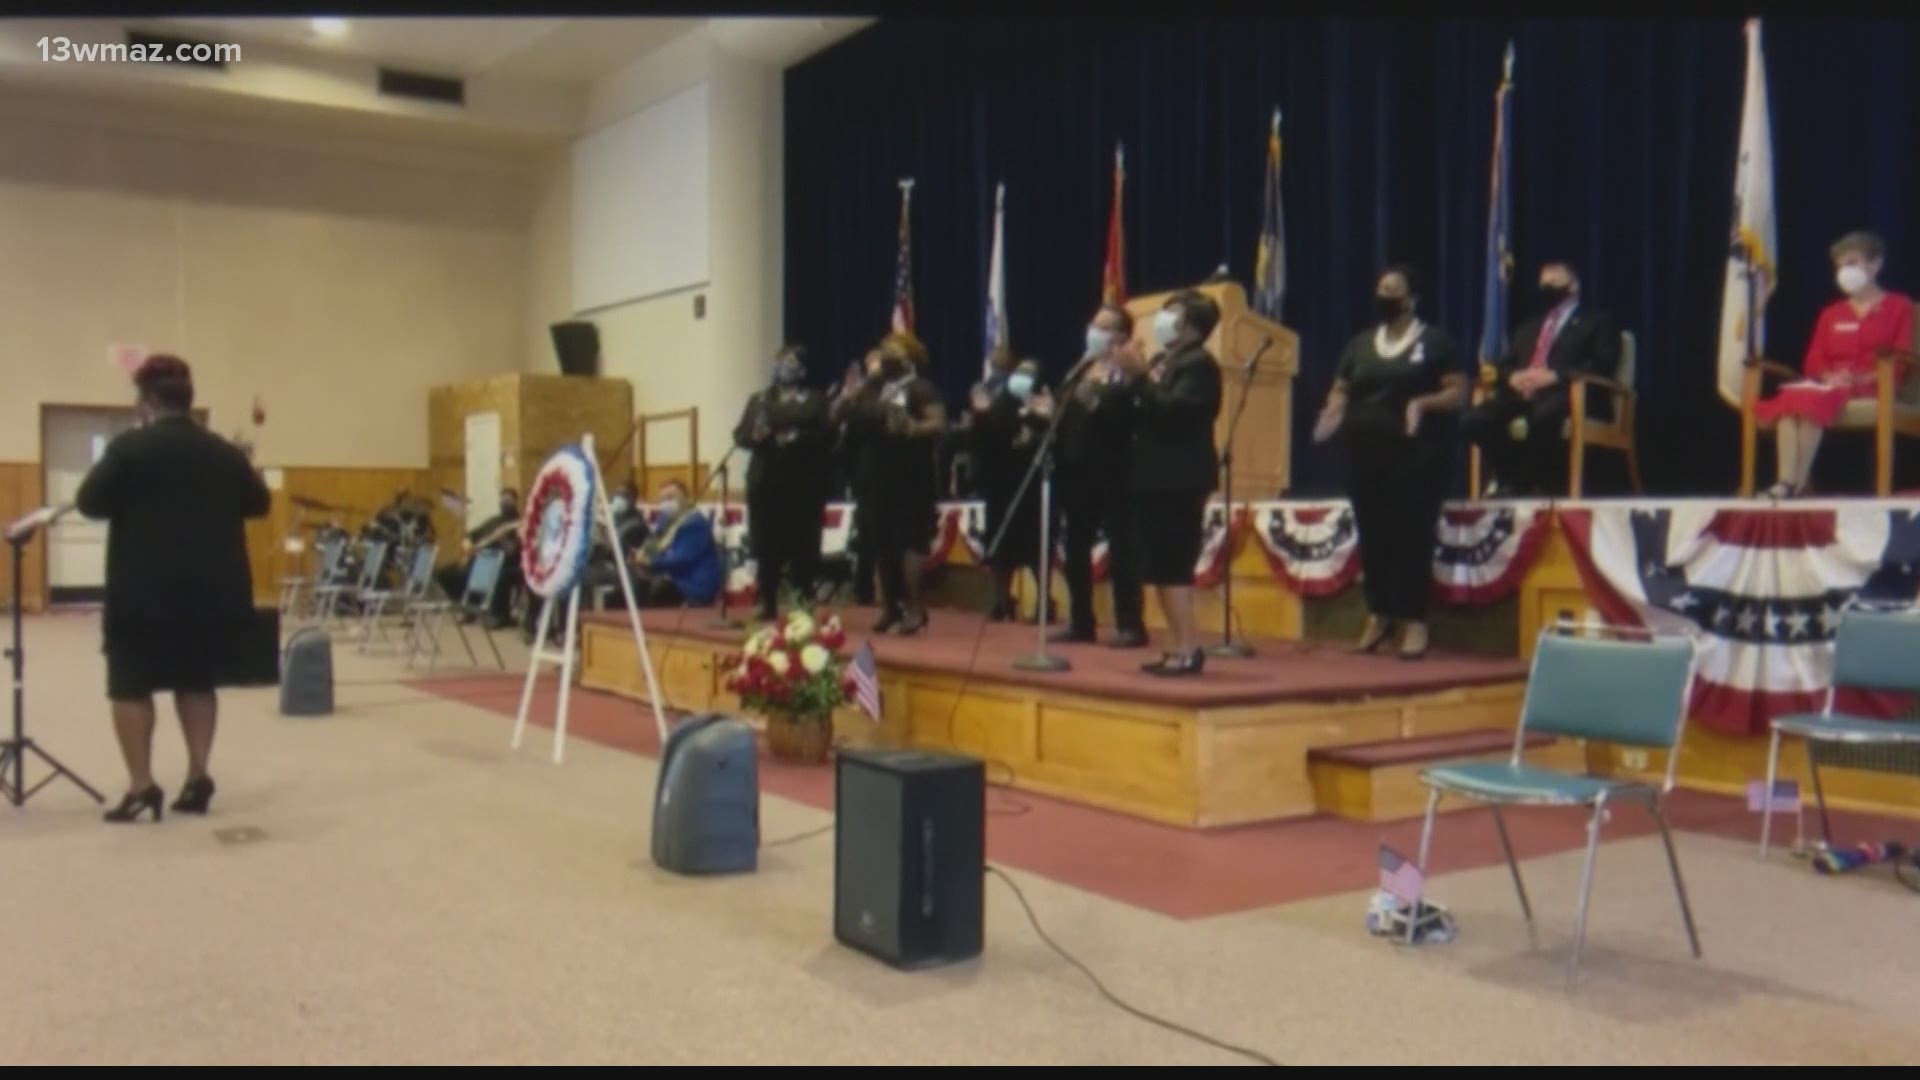 In honor of Veterans Day, vets in Dublin came together to share the gift of music.